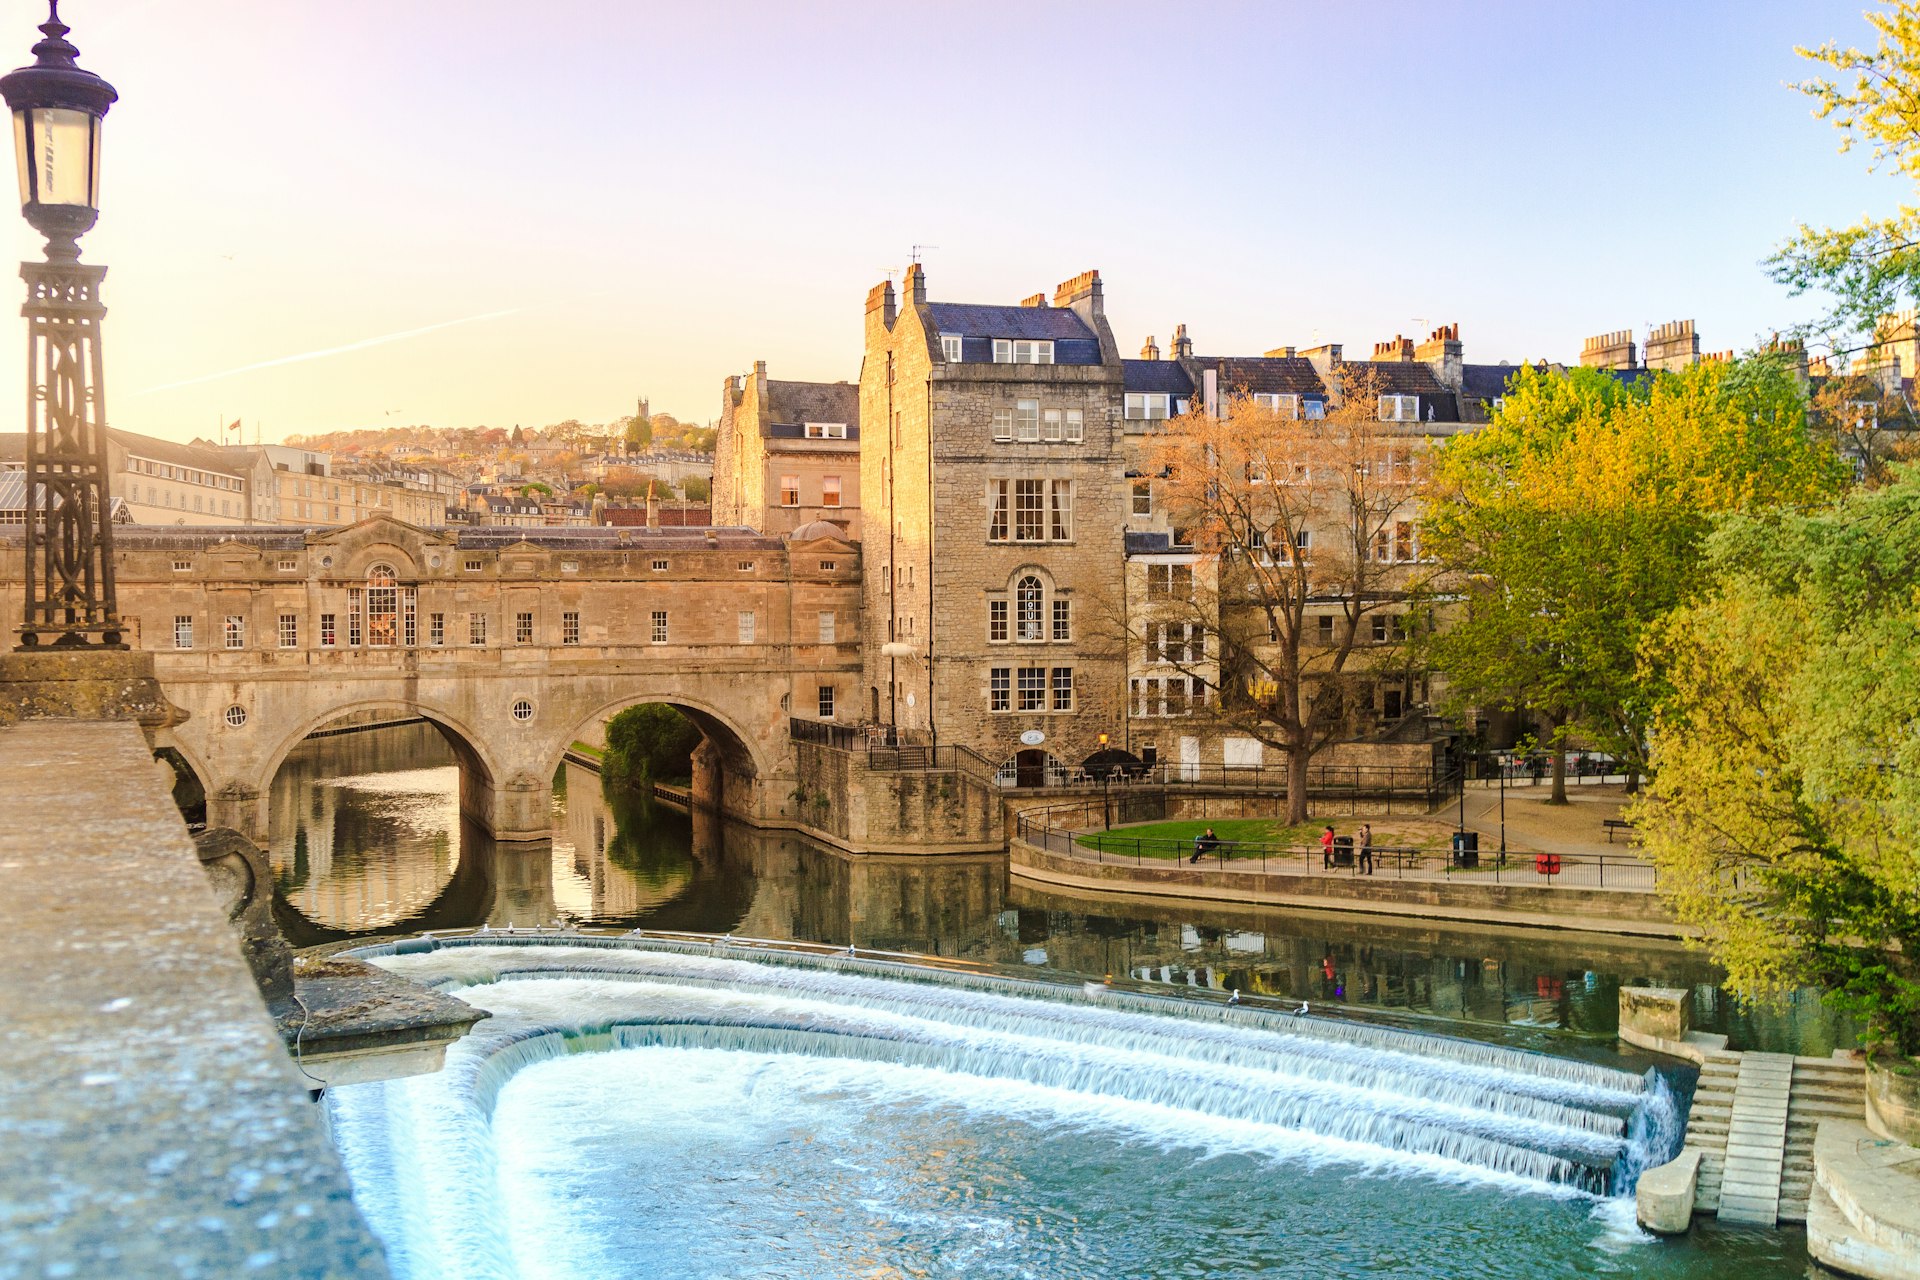 The stone Pulteney Bridge spans over the River Avon as the sun sets in the background. The bridge has curved arches underneath and windows along the side where the shops are.